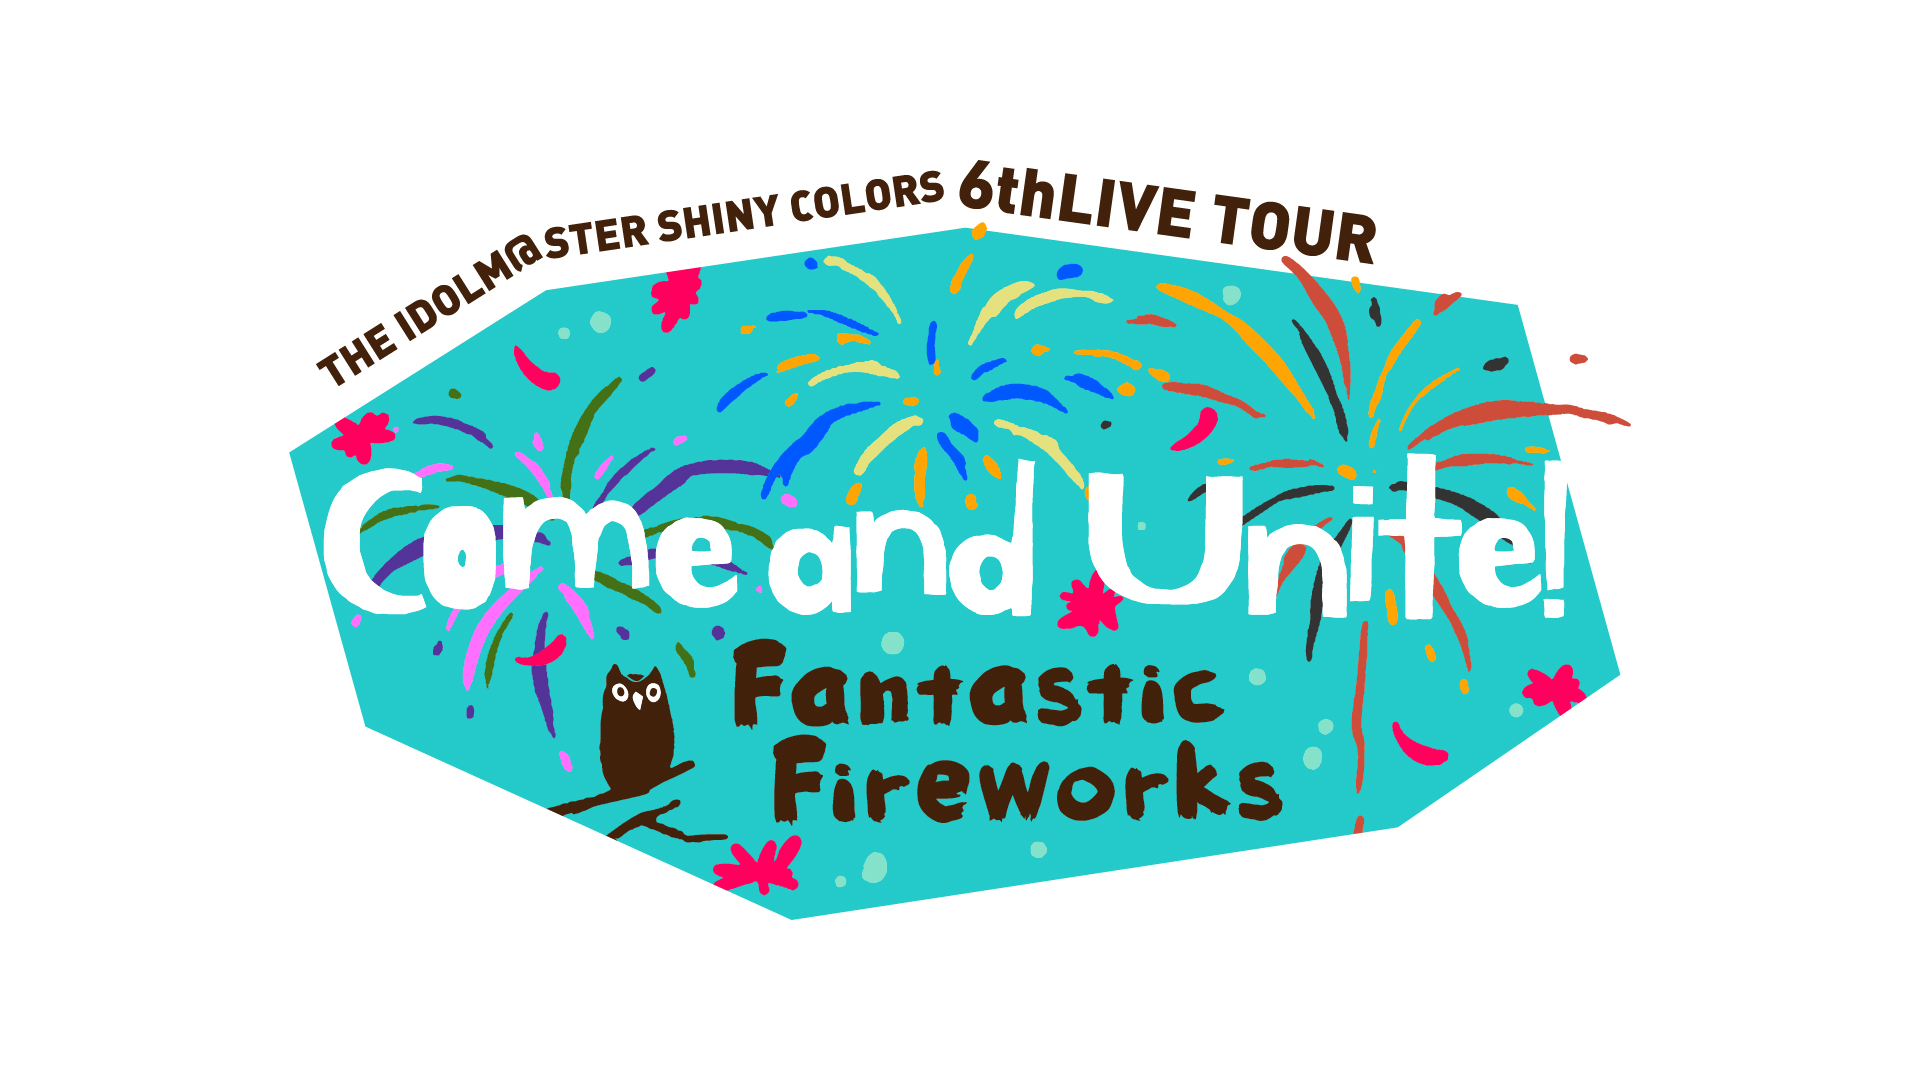 THE IDOLM＠STER SHINY COLORS 6thLIVE TOUR Come and Unite! Fantastic Fireworks